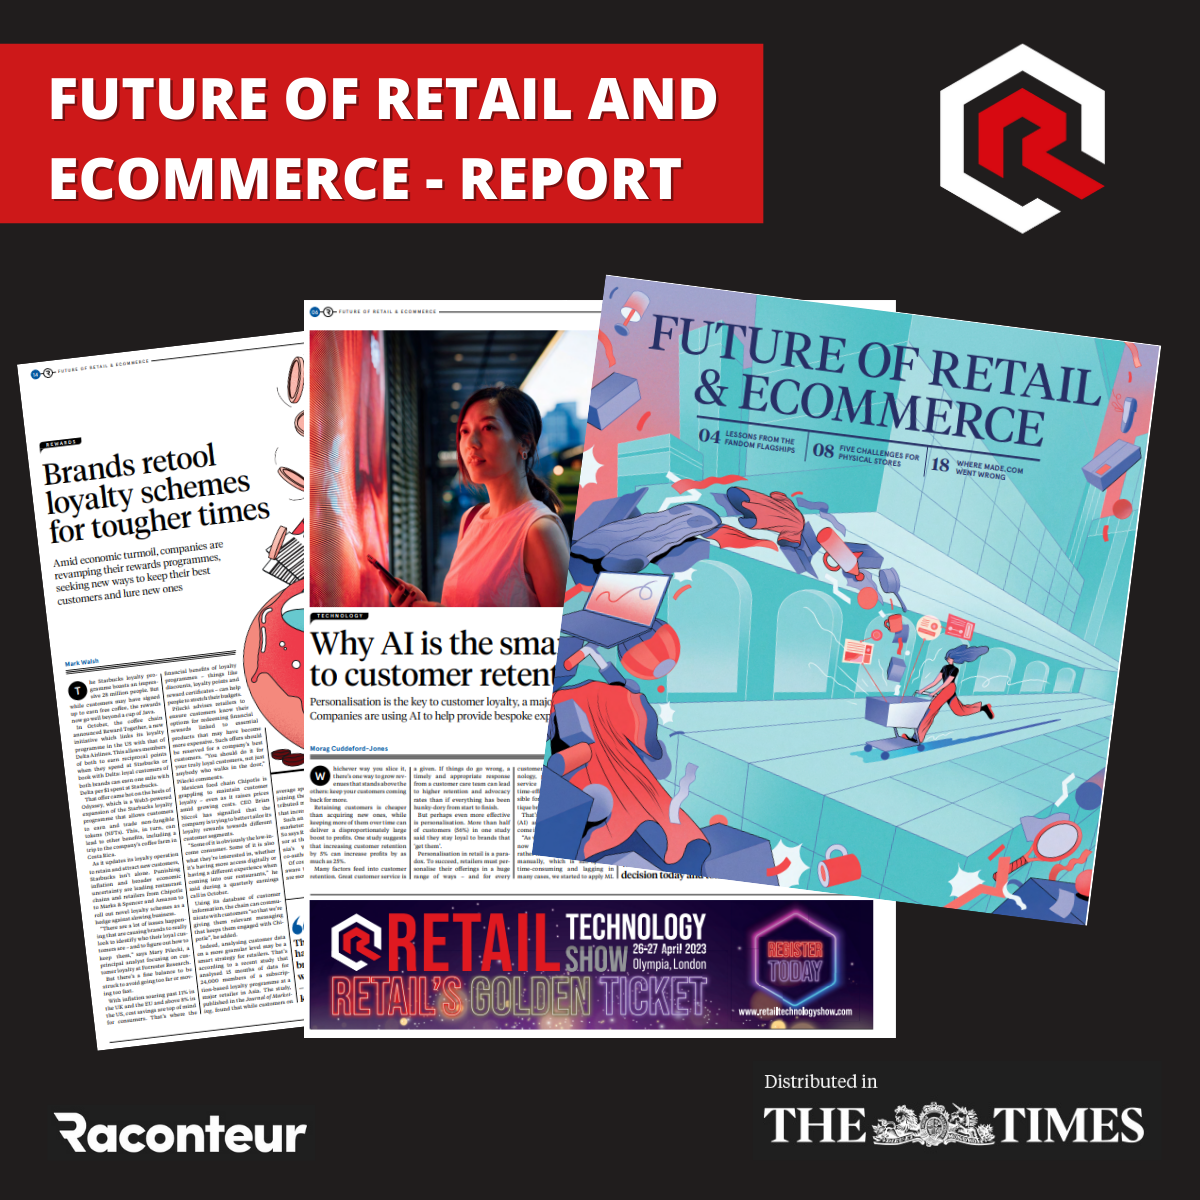 The Future of Retail and eCommerce report